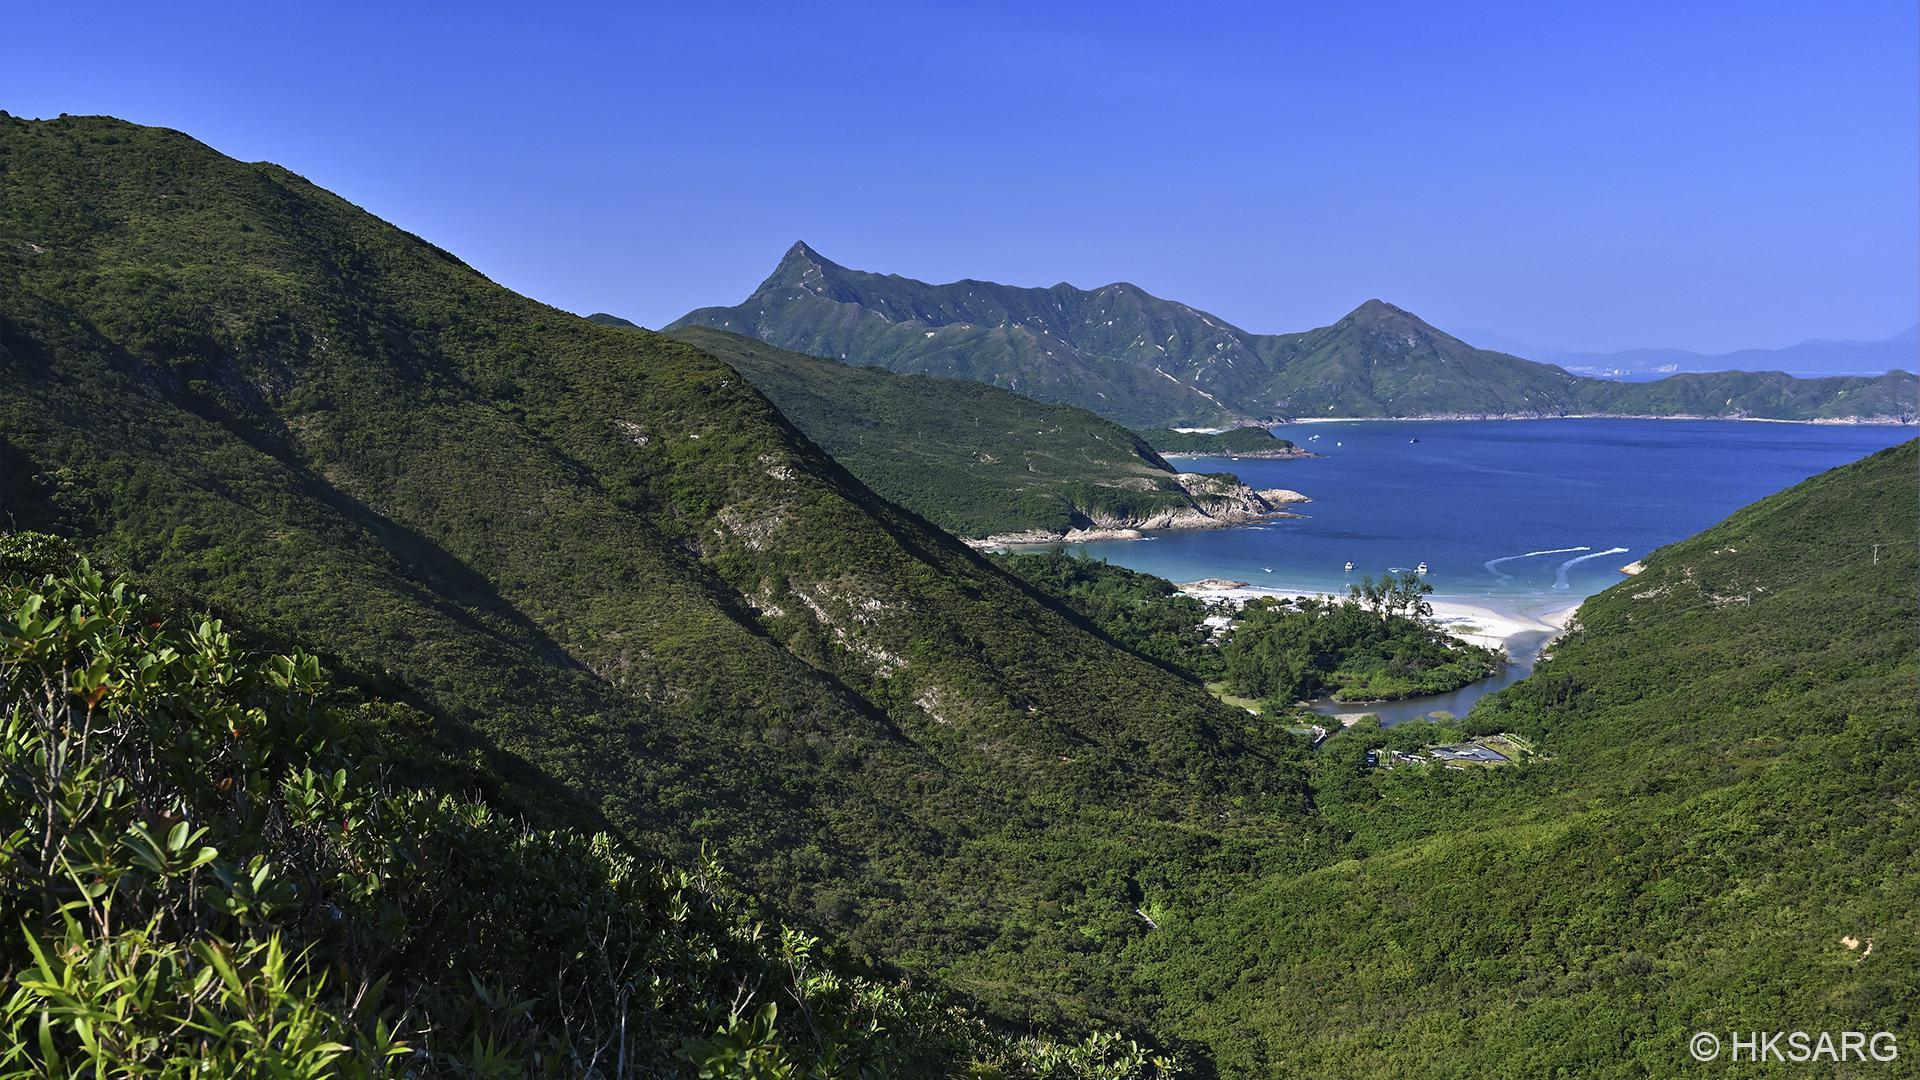 The Sai Kung area, in which Johan resides and usually spends his time.